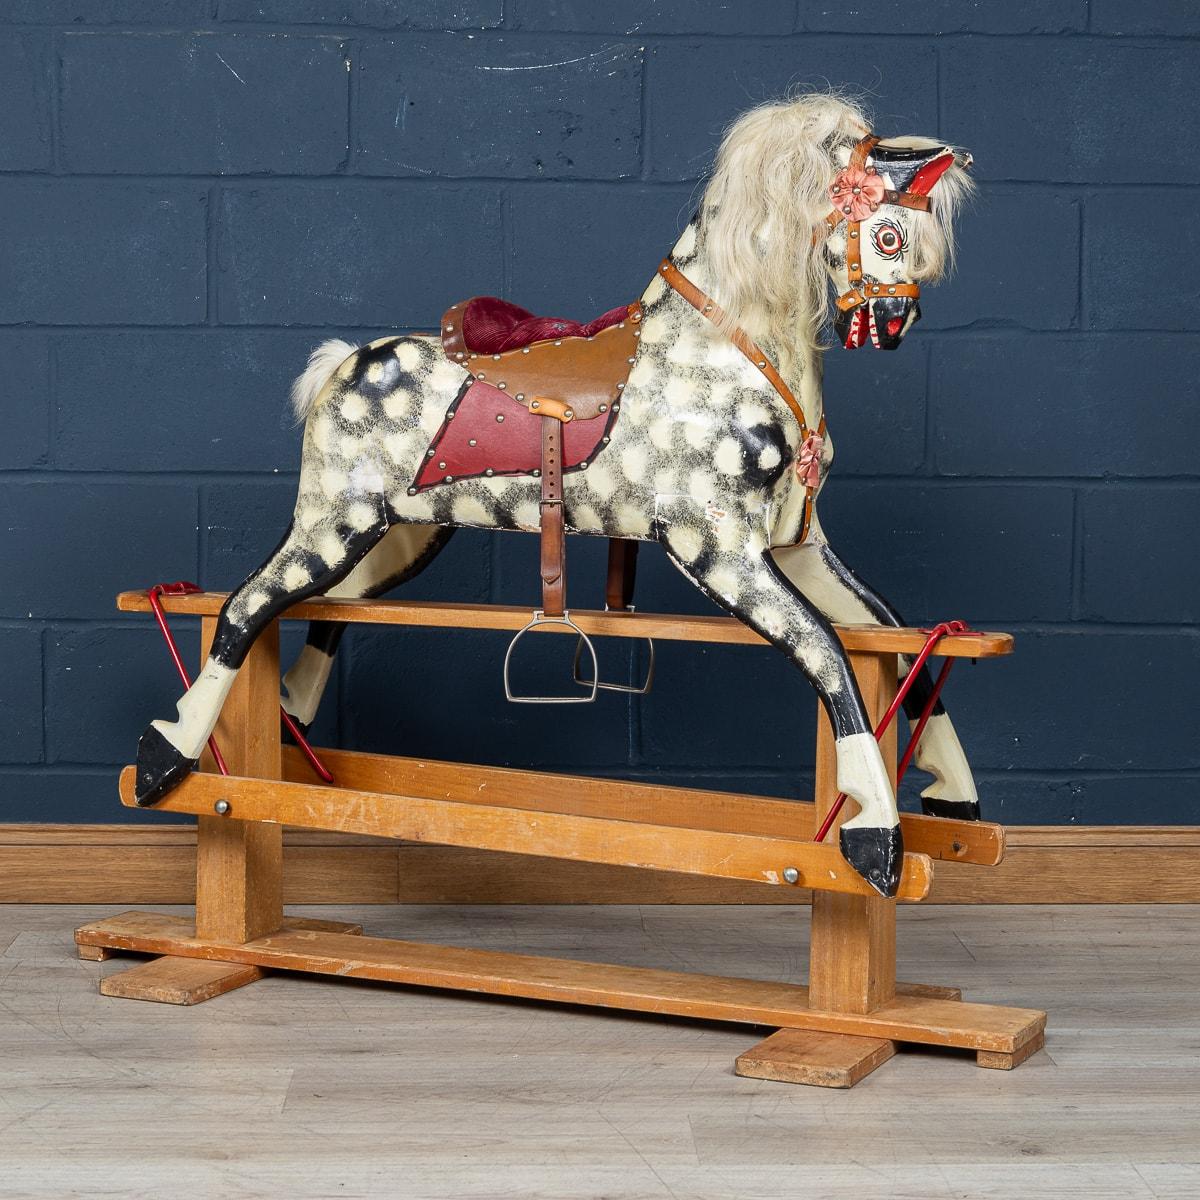 Mid-20th Century 20th Century Wooden Childs Rocking Horse By Collinson, England c.1930